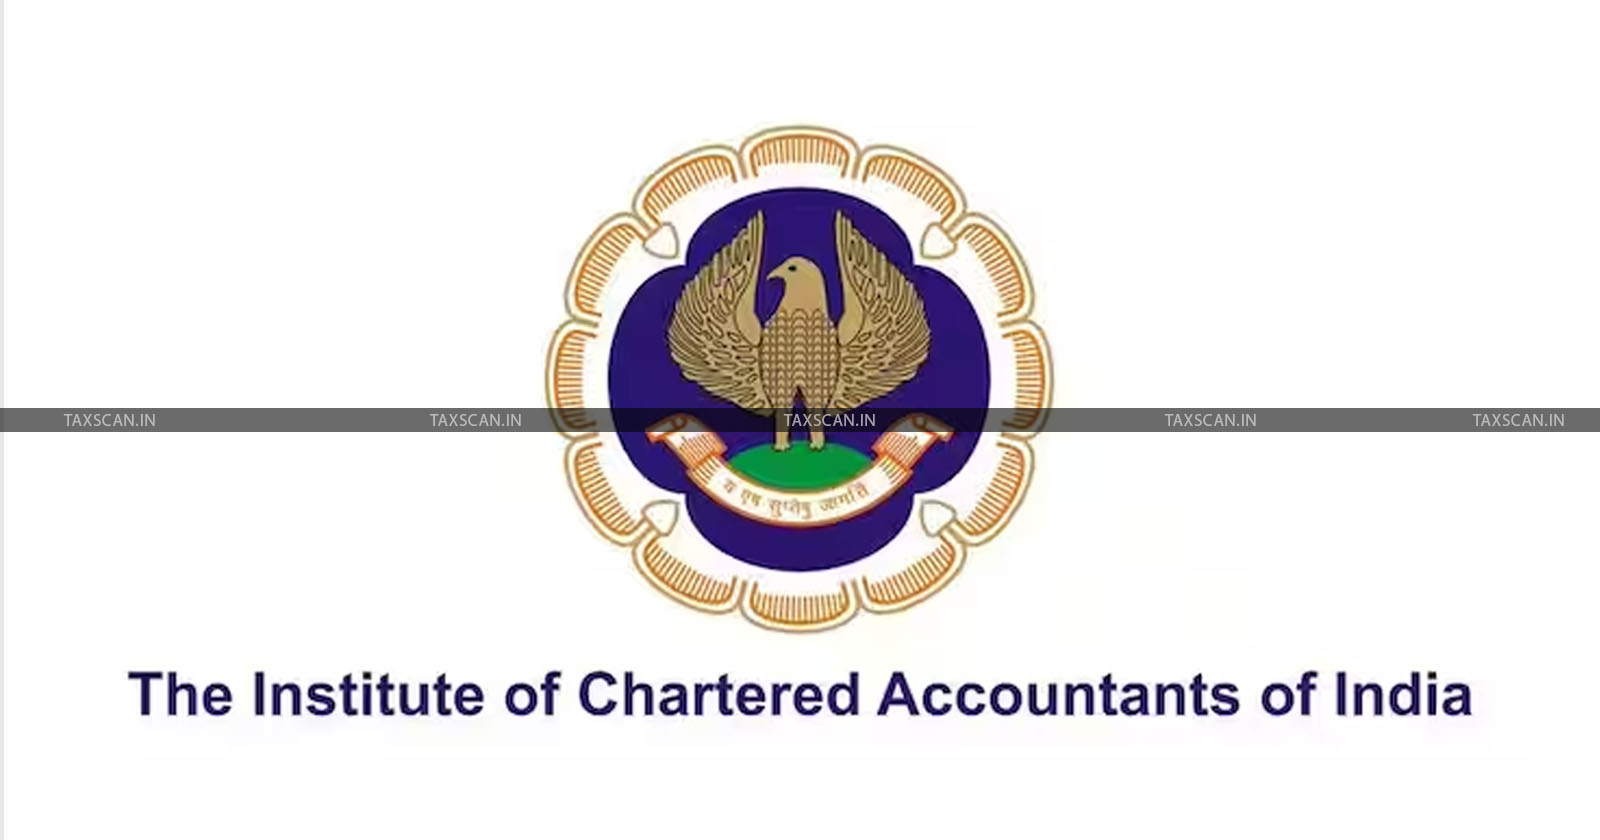 ICAI - CA - Institute of Chartered Accountants of India - Chartered Accountant - ICAI verdict on professional misconduct - Taxscan